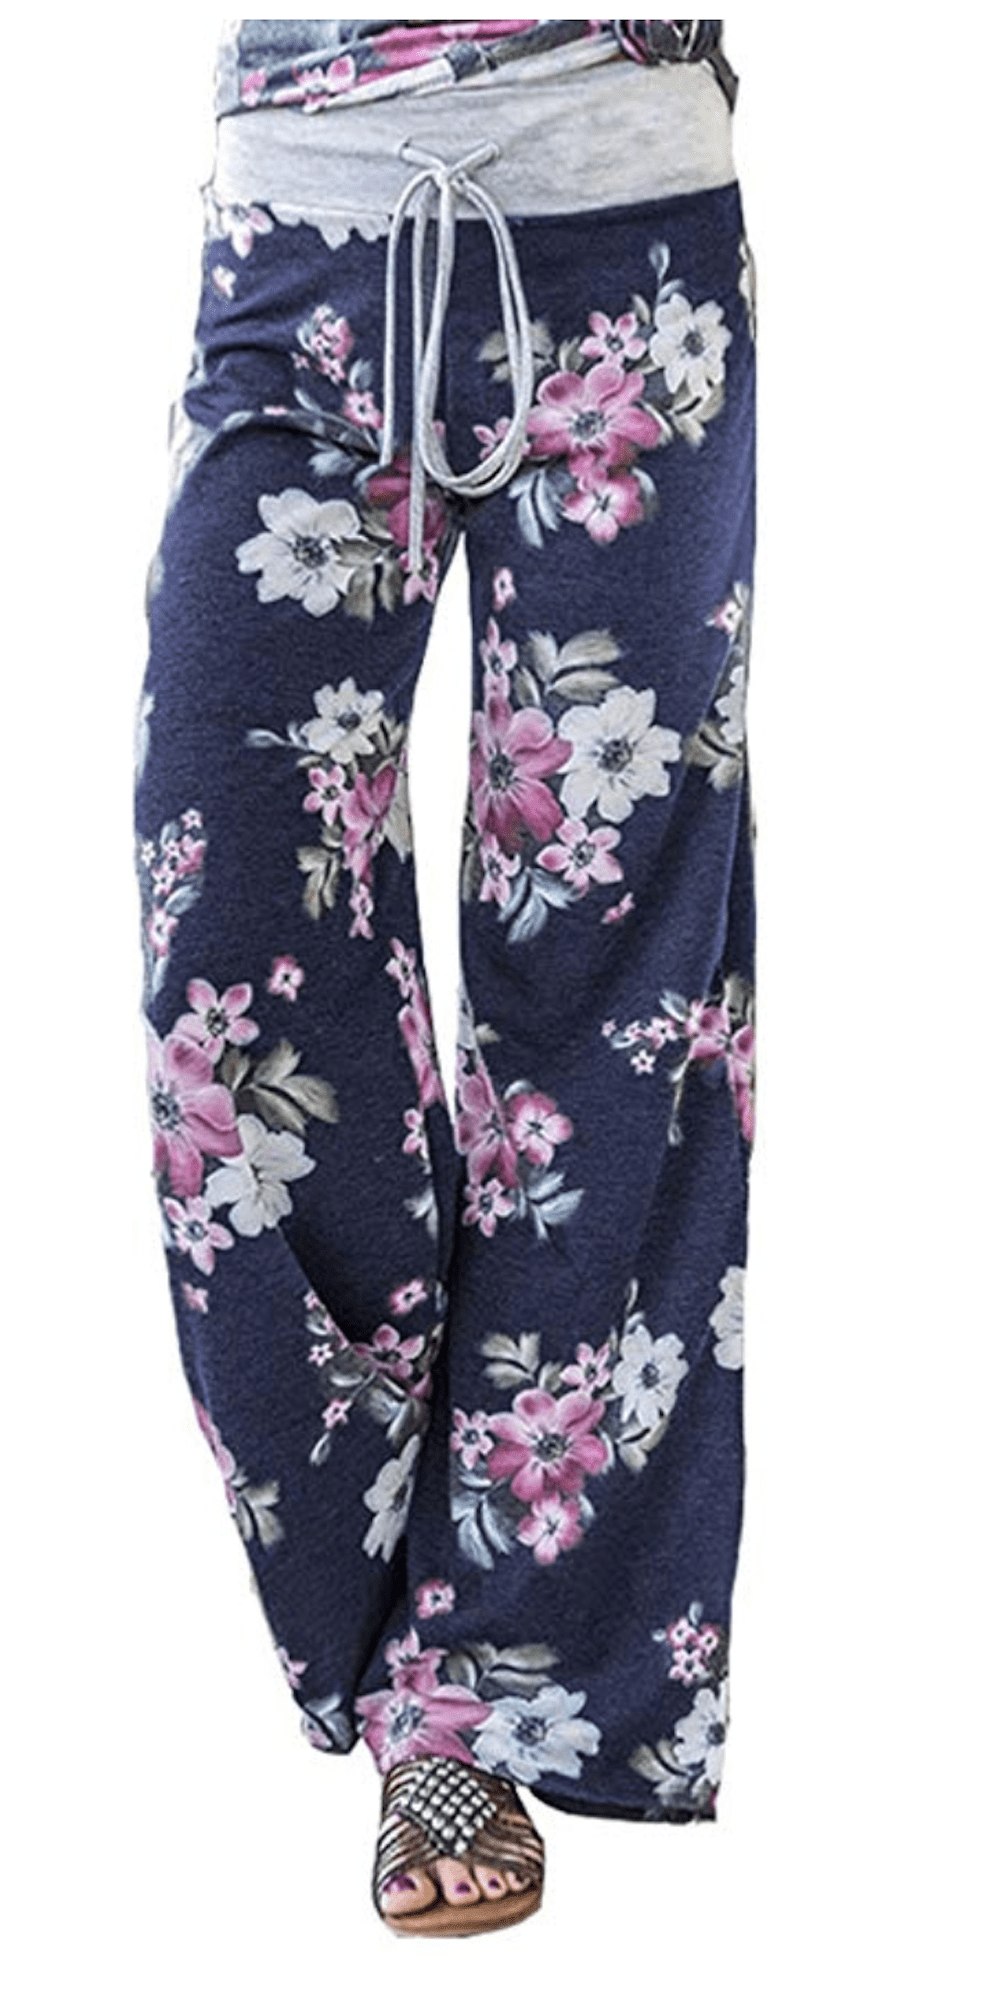 Medium,Black 6 Womens Printed Wide-Leg Pants Comfy Stretch Floral Print Drawstring Lounge Trousers Casual Stretchy Casualpants